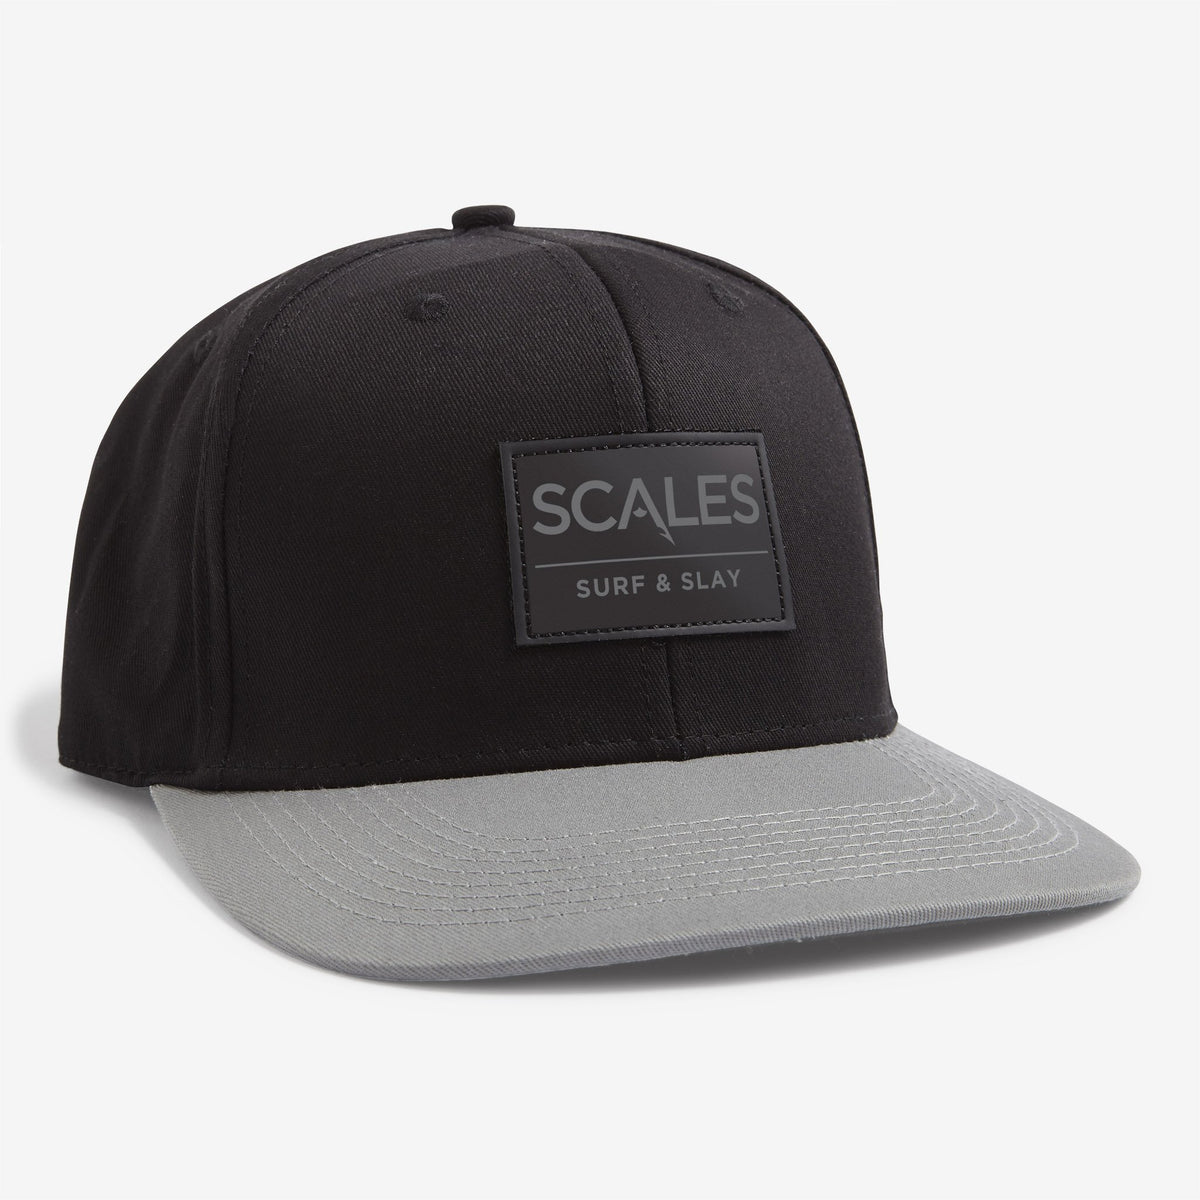 SCALES Slay All Day Snapback - Black/Charcoal